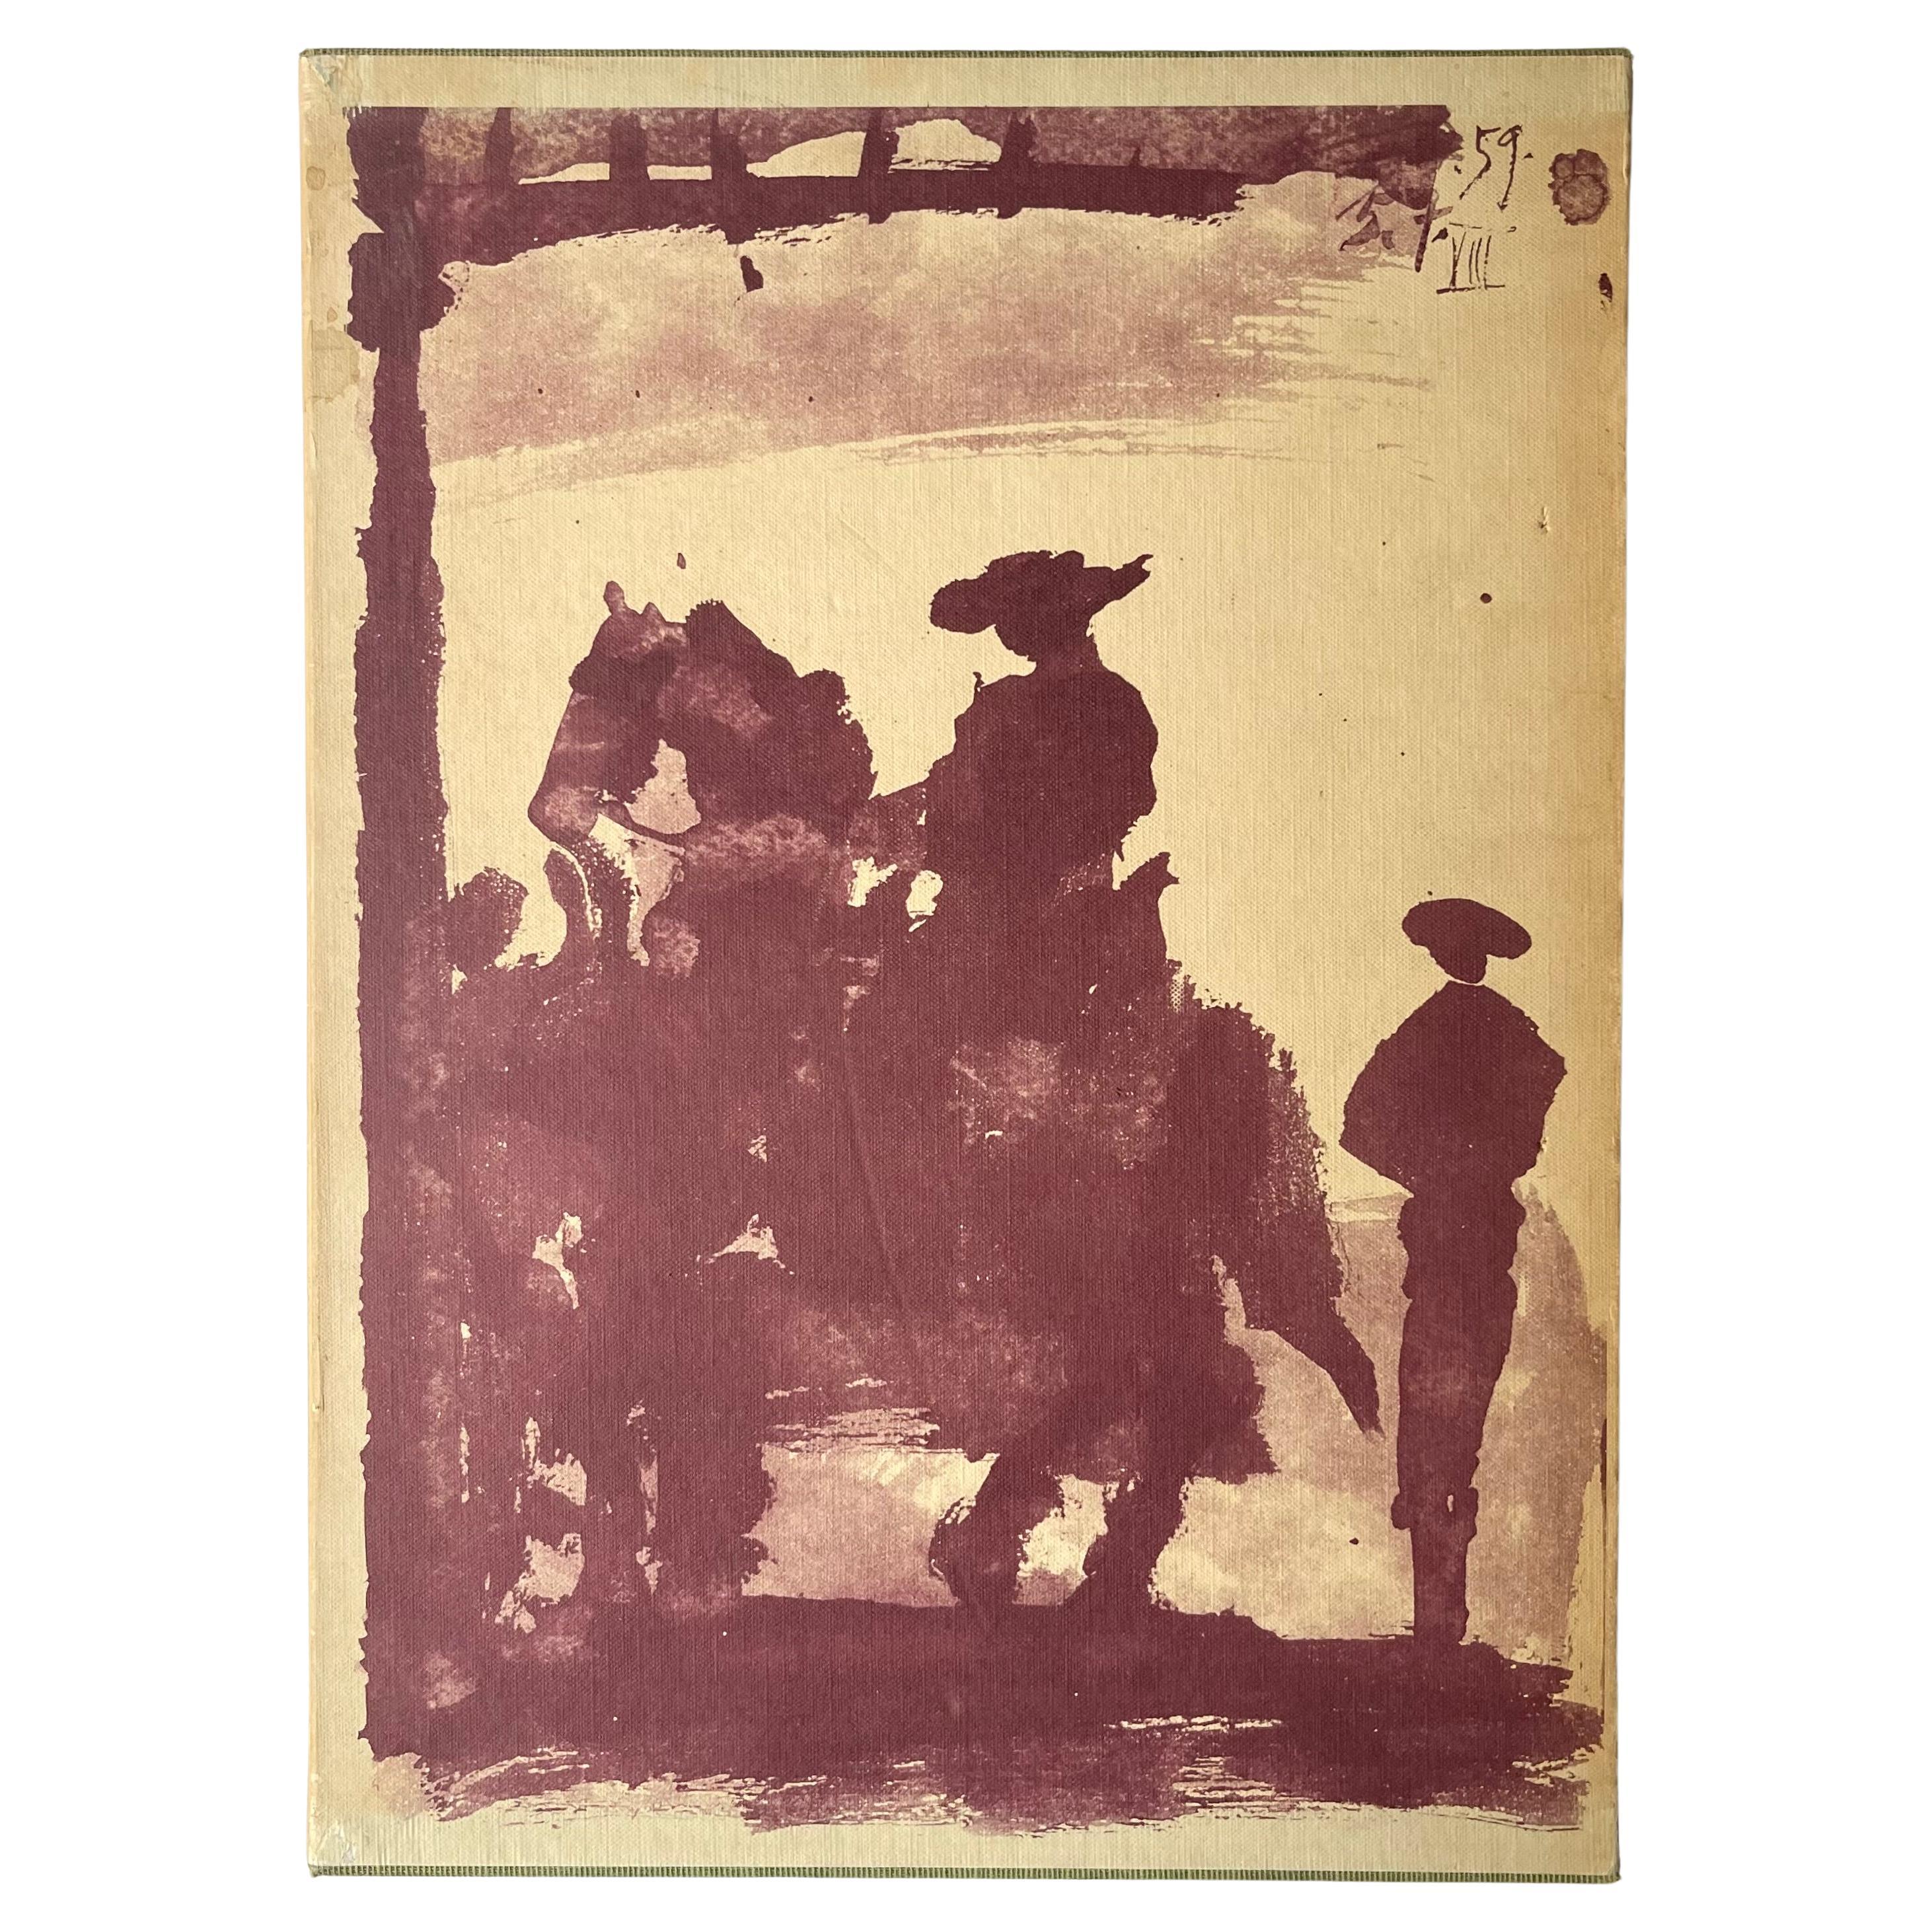 First true edition, published by Cercle D'art Paris 1961. Lithographs by Mourlot

A scarce first edition copy in original slipcase of Pablo Picasso's seminal "Toros y Toreros" artists’ book. The book reproduces three sketchbooks by Pablo Picasso in